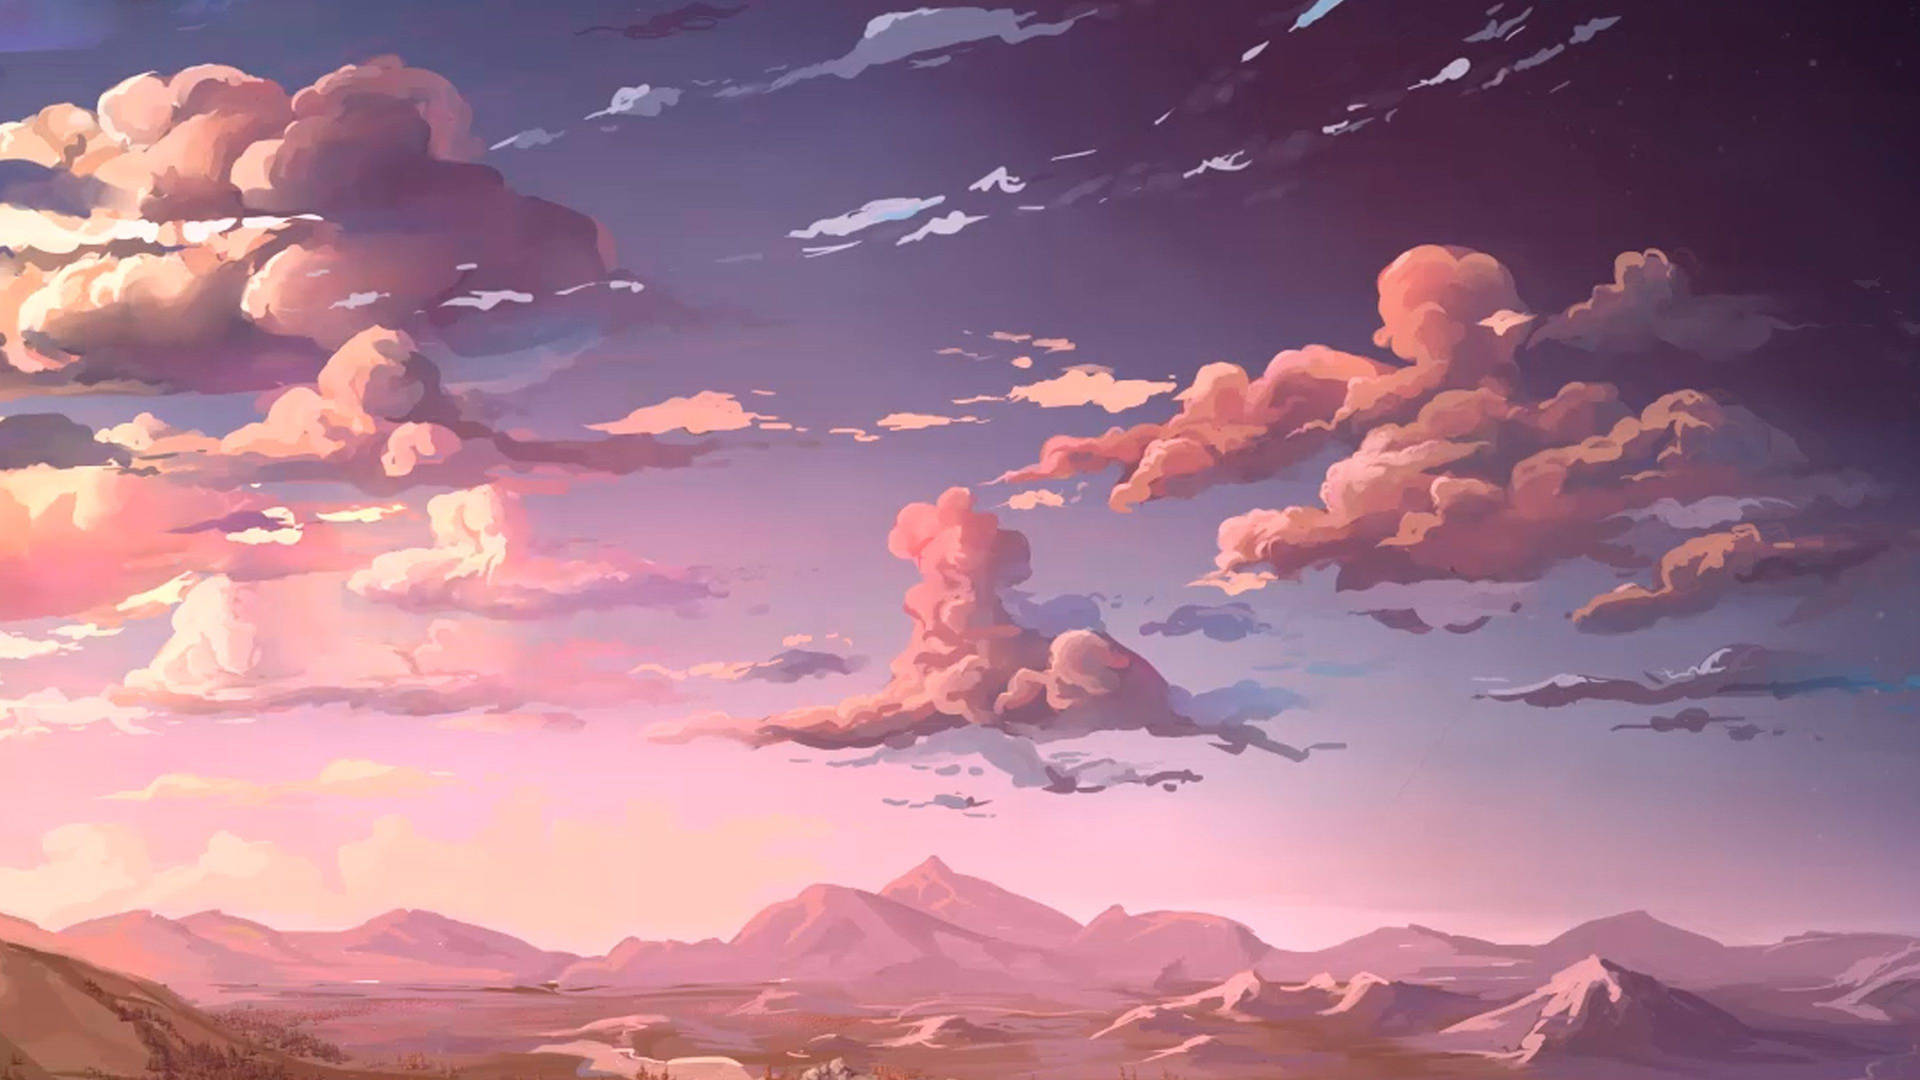 Anime Clouds And Mountains Aesthetic Mac